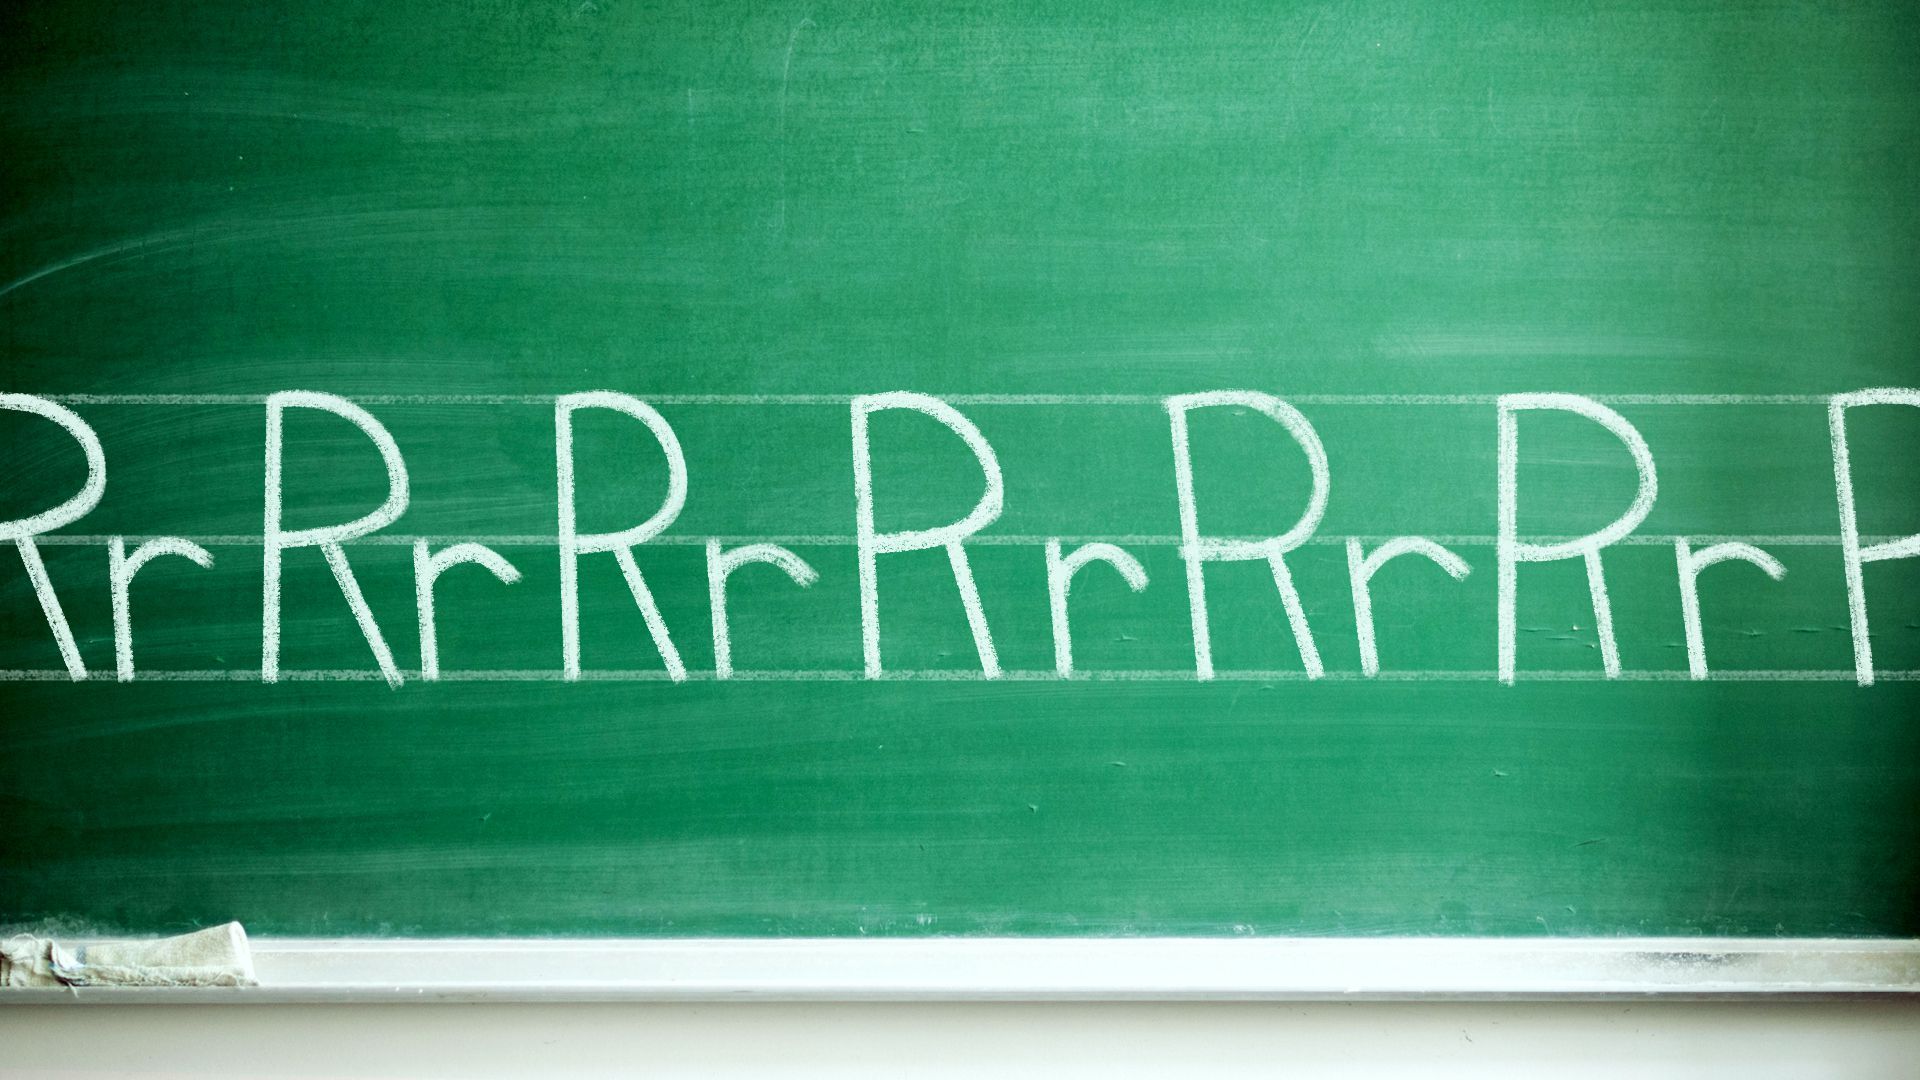 Illustration of a chalkboard with the alphabet written on it, but every letter is "R."